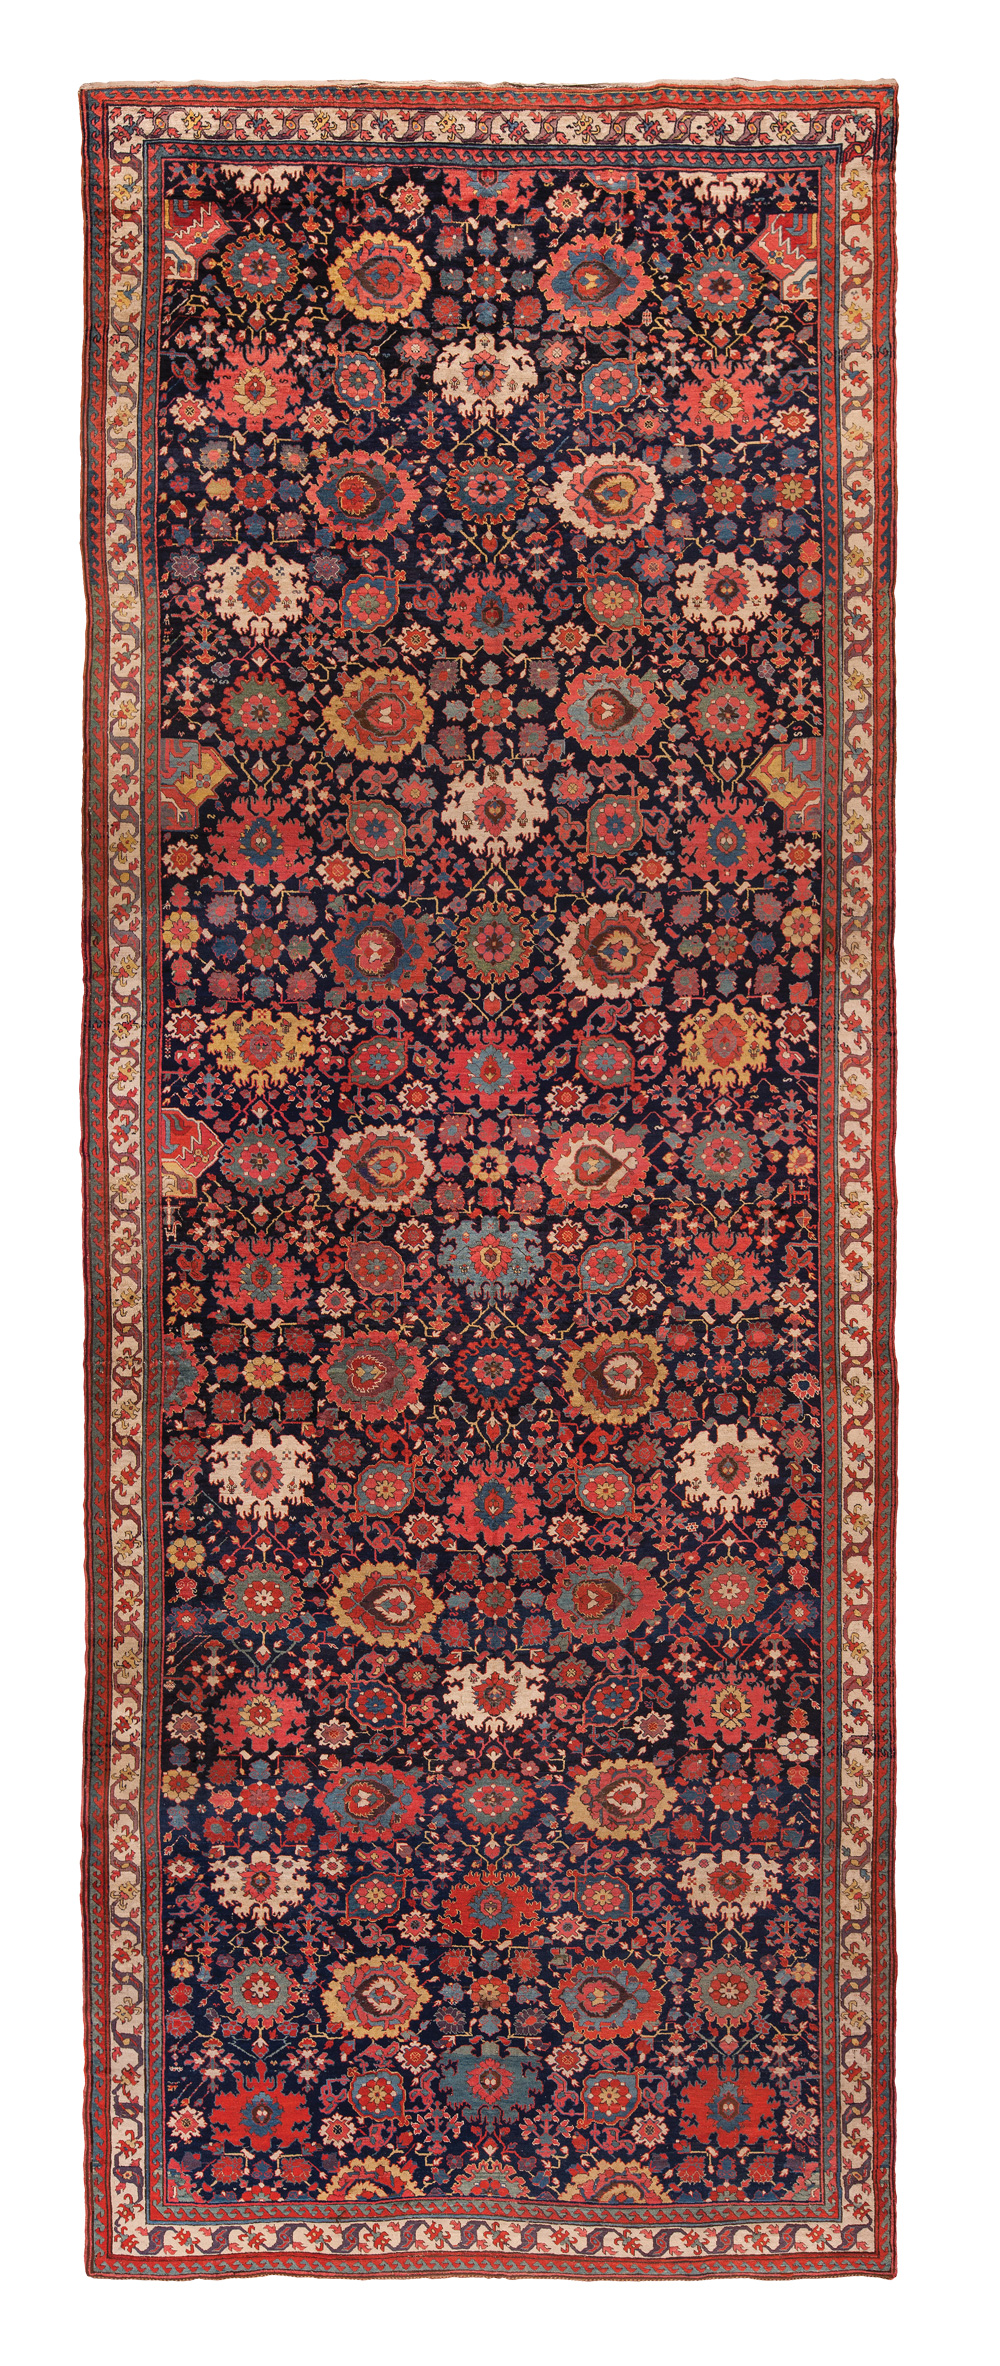 North-west Persian harshang carpet, 18th century. 2.77 x 7.09 m (9' 1" x 23' 3")